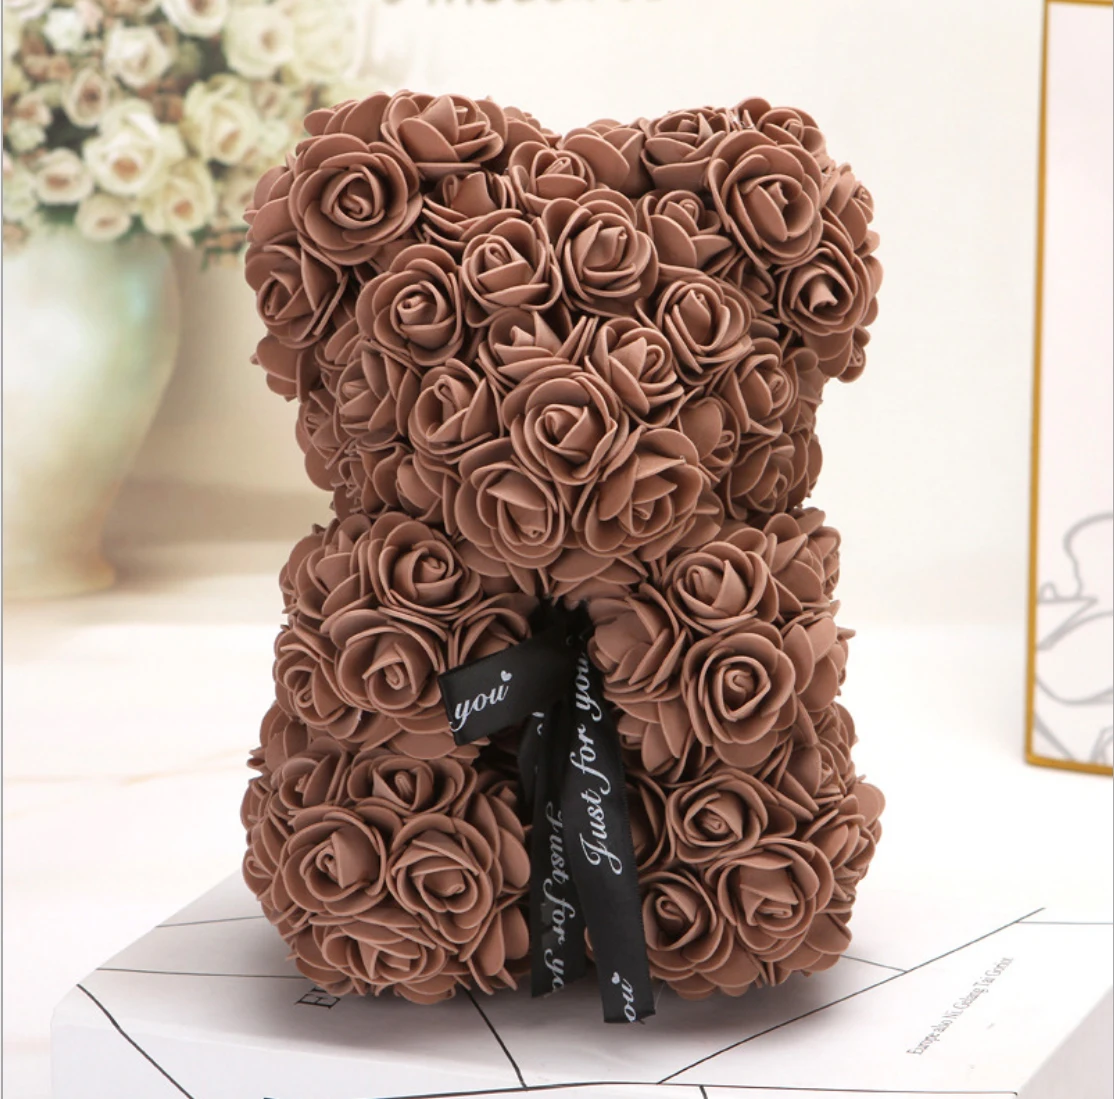 

New 25cm Bear of Roses Teddy Bear Rose Soap Foam Flower Artificial New Year Gifts for Women Valentines Party Decoration